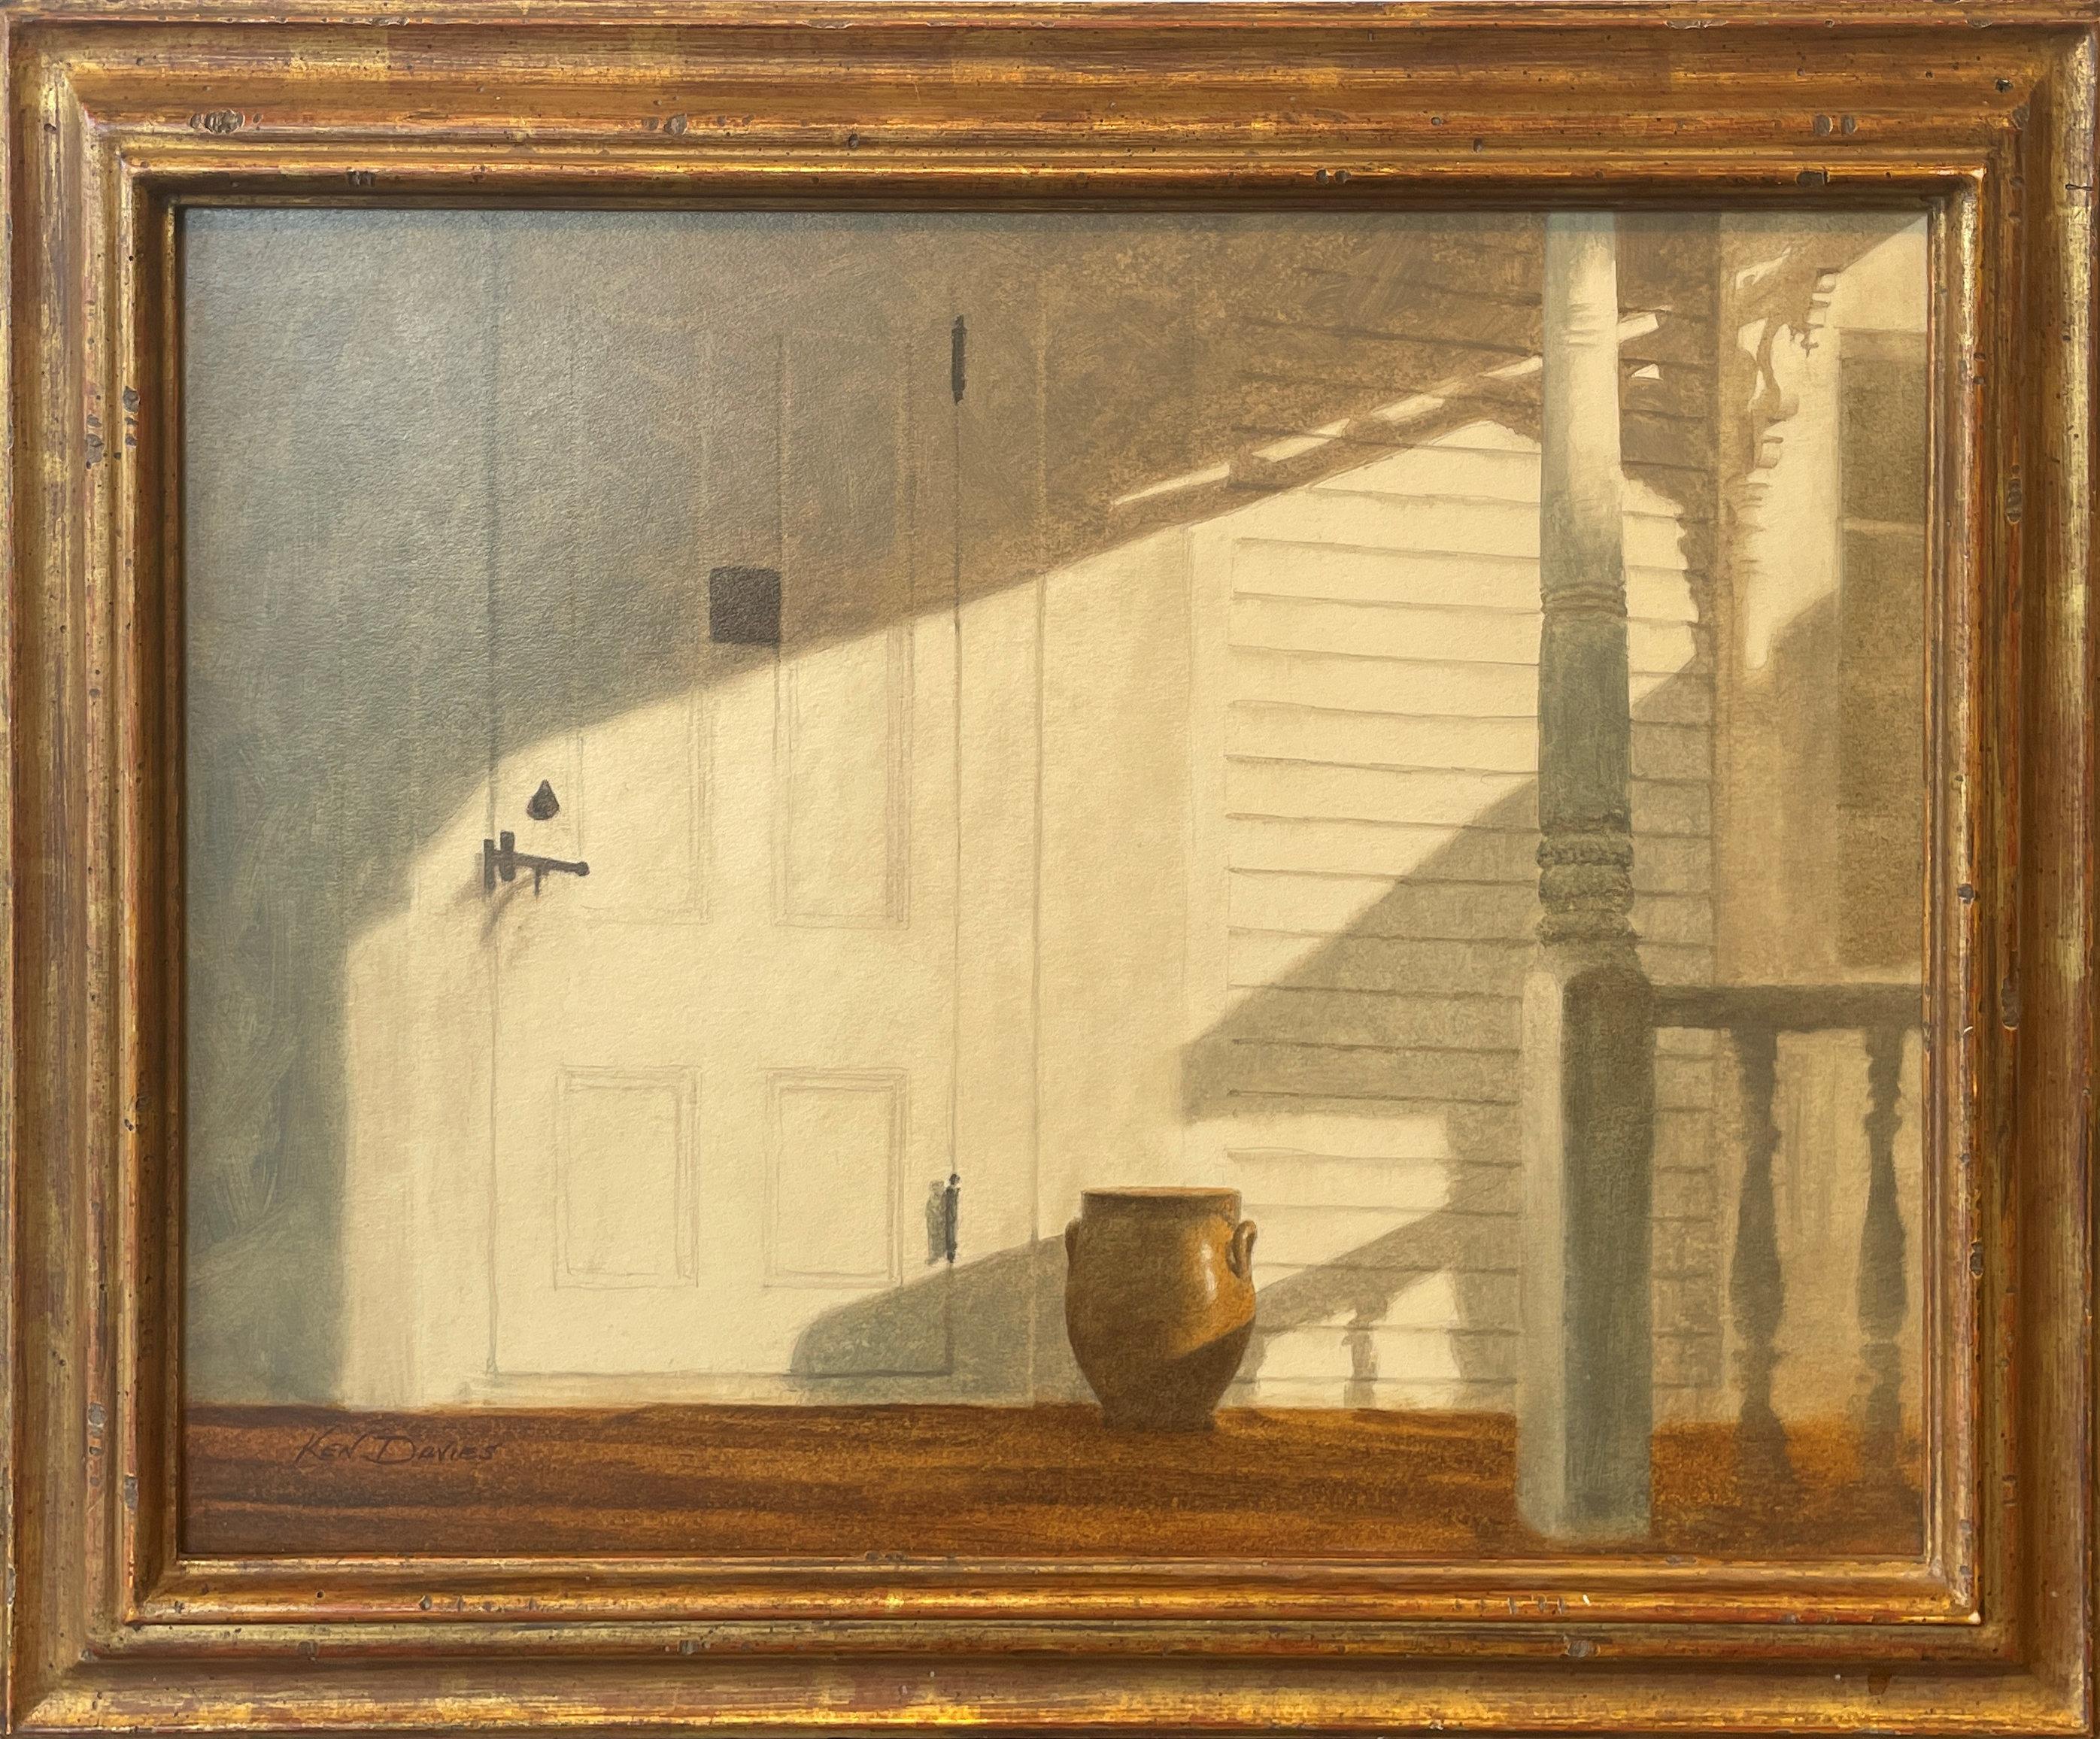 Ken Davies
Doorway, circa 1970
Signed lower left
Oil on board
11 x 15 inches

Provenance:
The Heritage Gallery Inc., Columbus, Ohio, 1975
Private Collection, Columbus
Acquired from the estate of the above

Born in New Bedford, Massachusetts, Kenneth